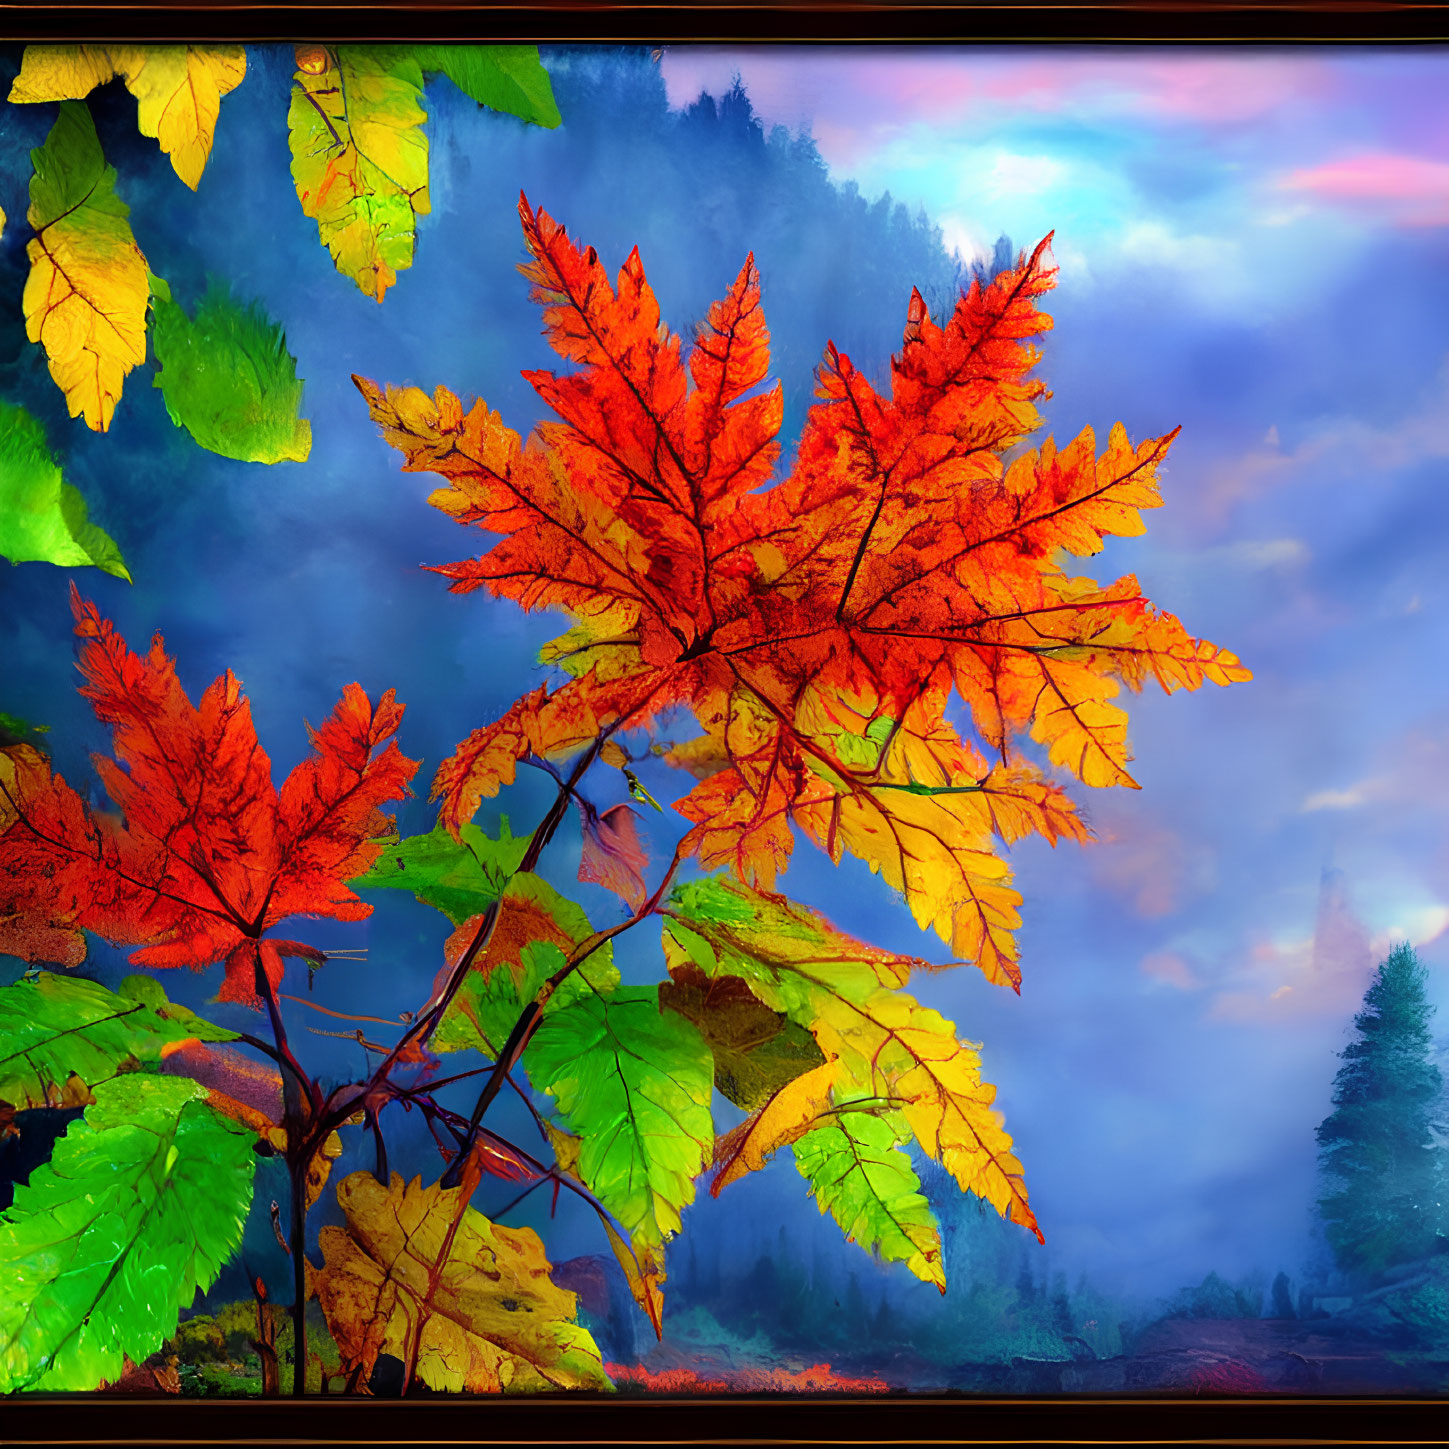 Colorful Autumn Leaves and Misty Forest Dusk Scene